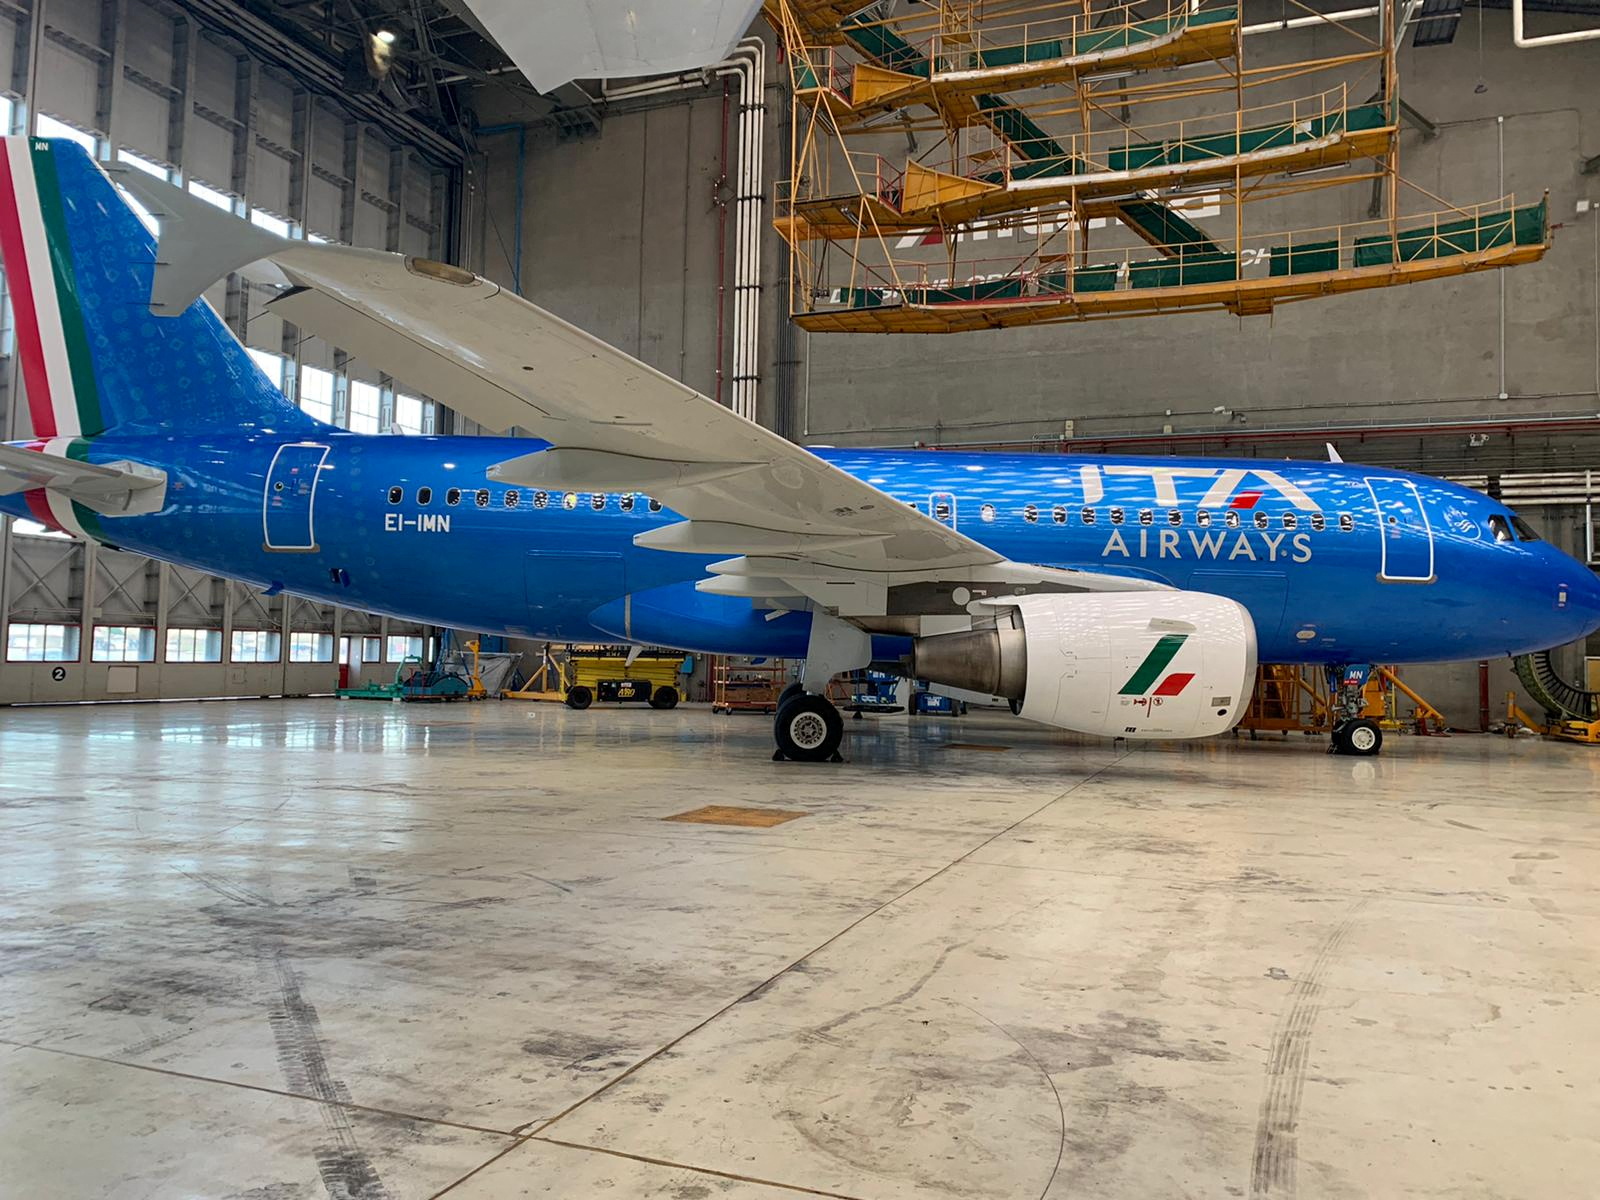 The new blue livery of the ITA's planes